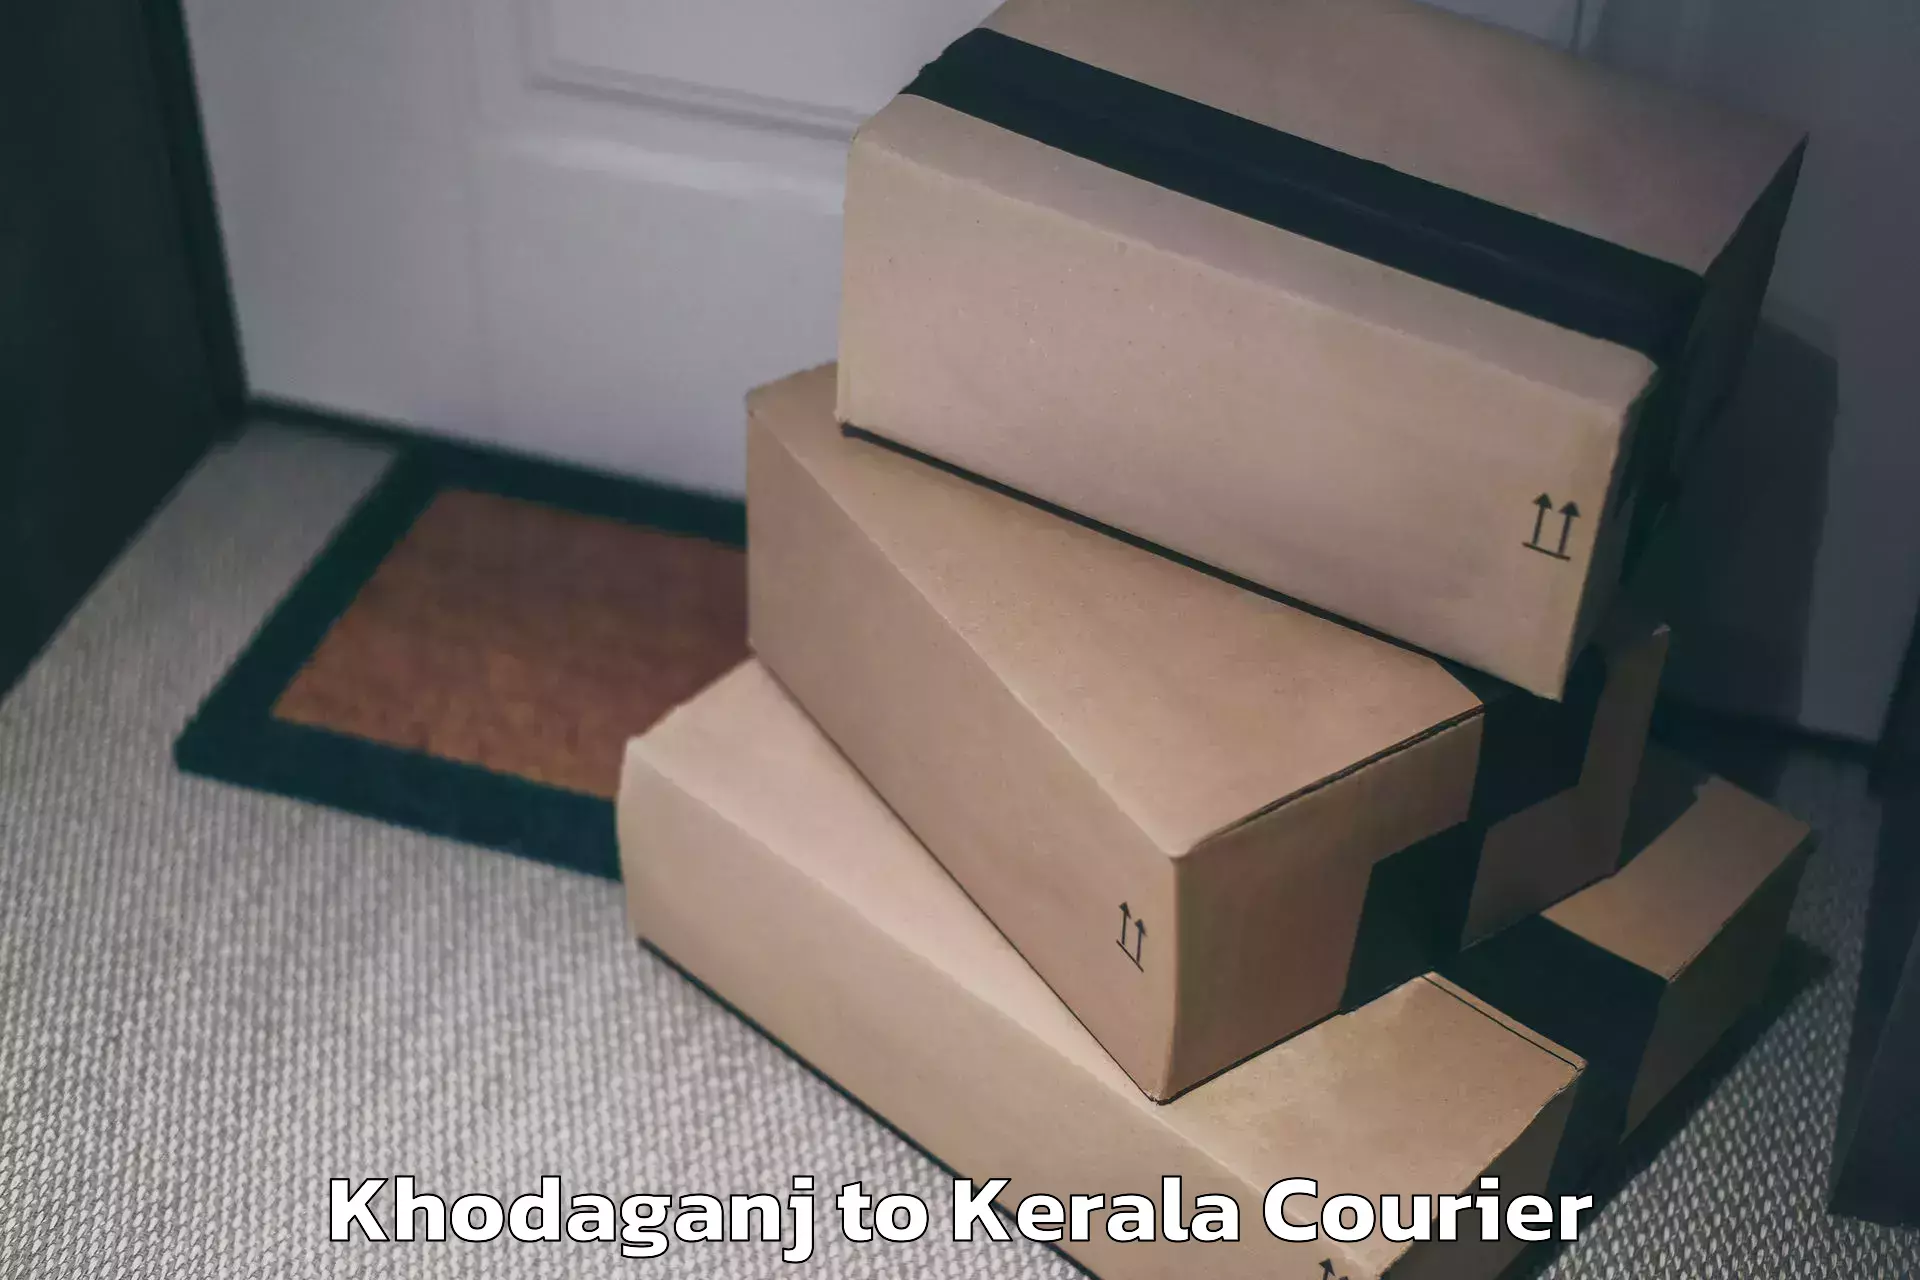 Luggage transfer service Khodaganj to Cochin University of Science and Technology